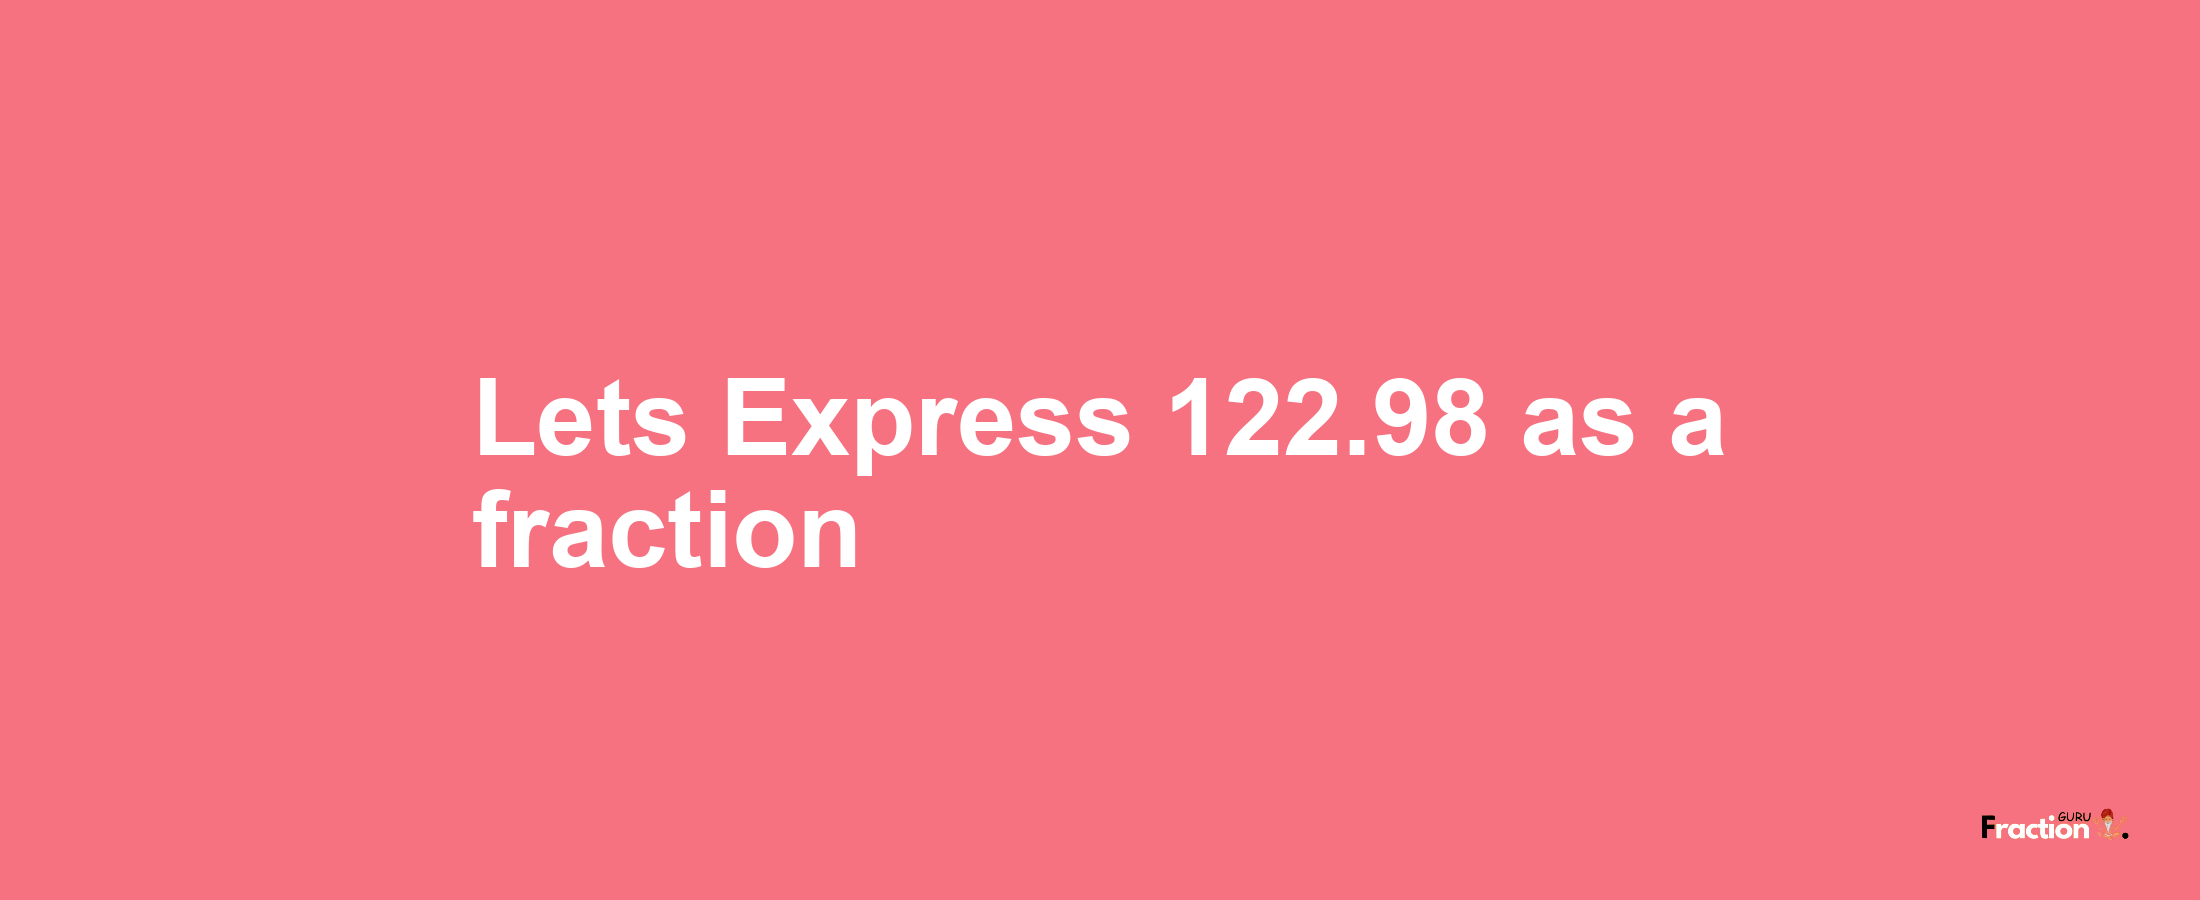 Lets Express 122.98 as afraction